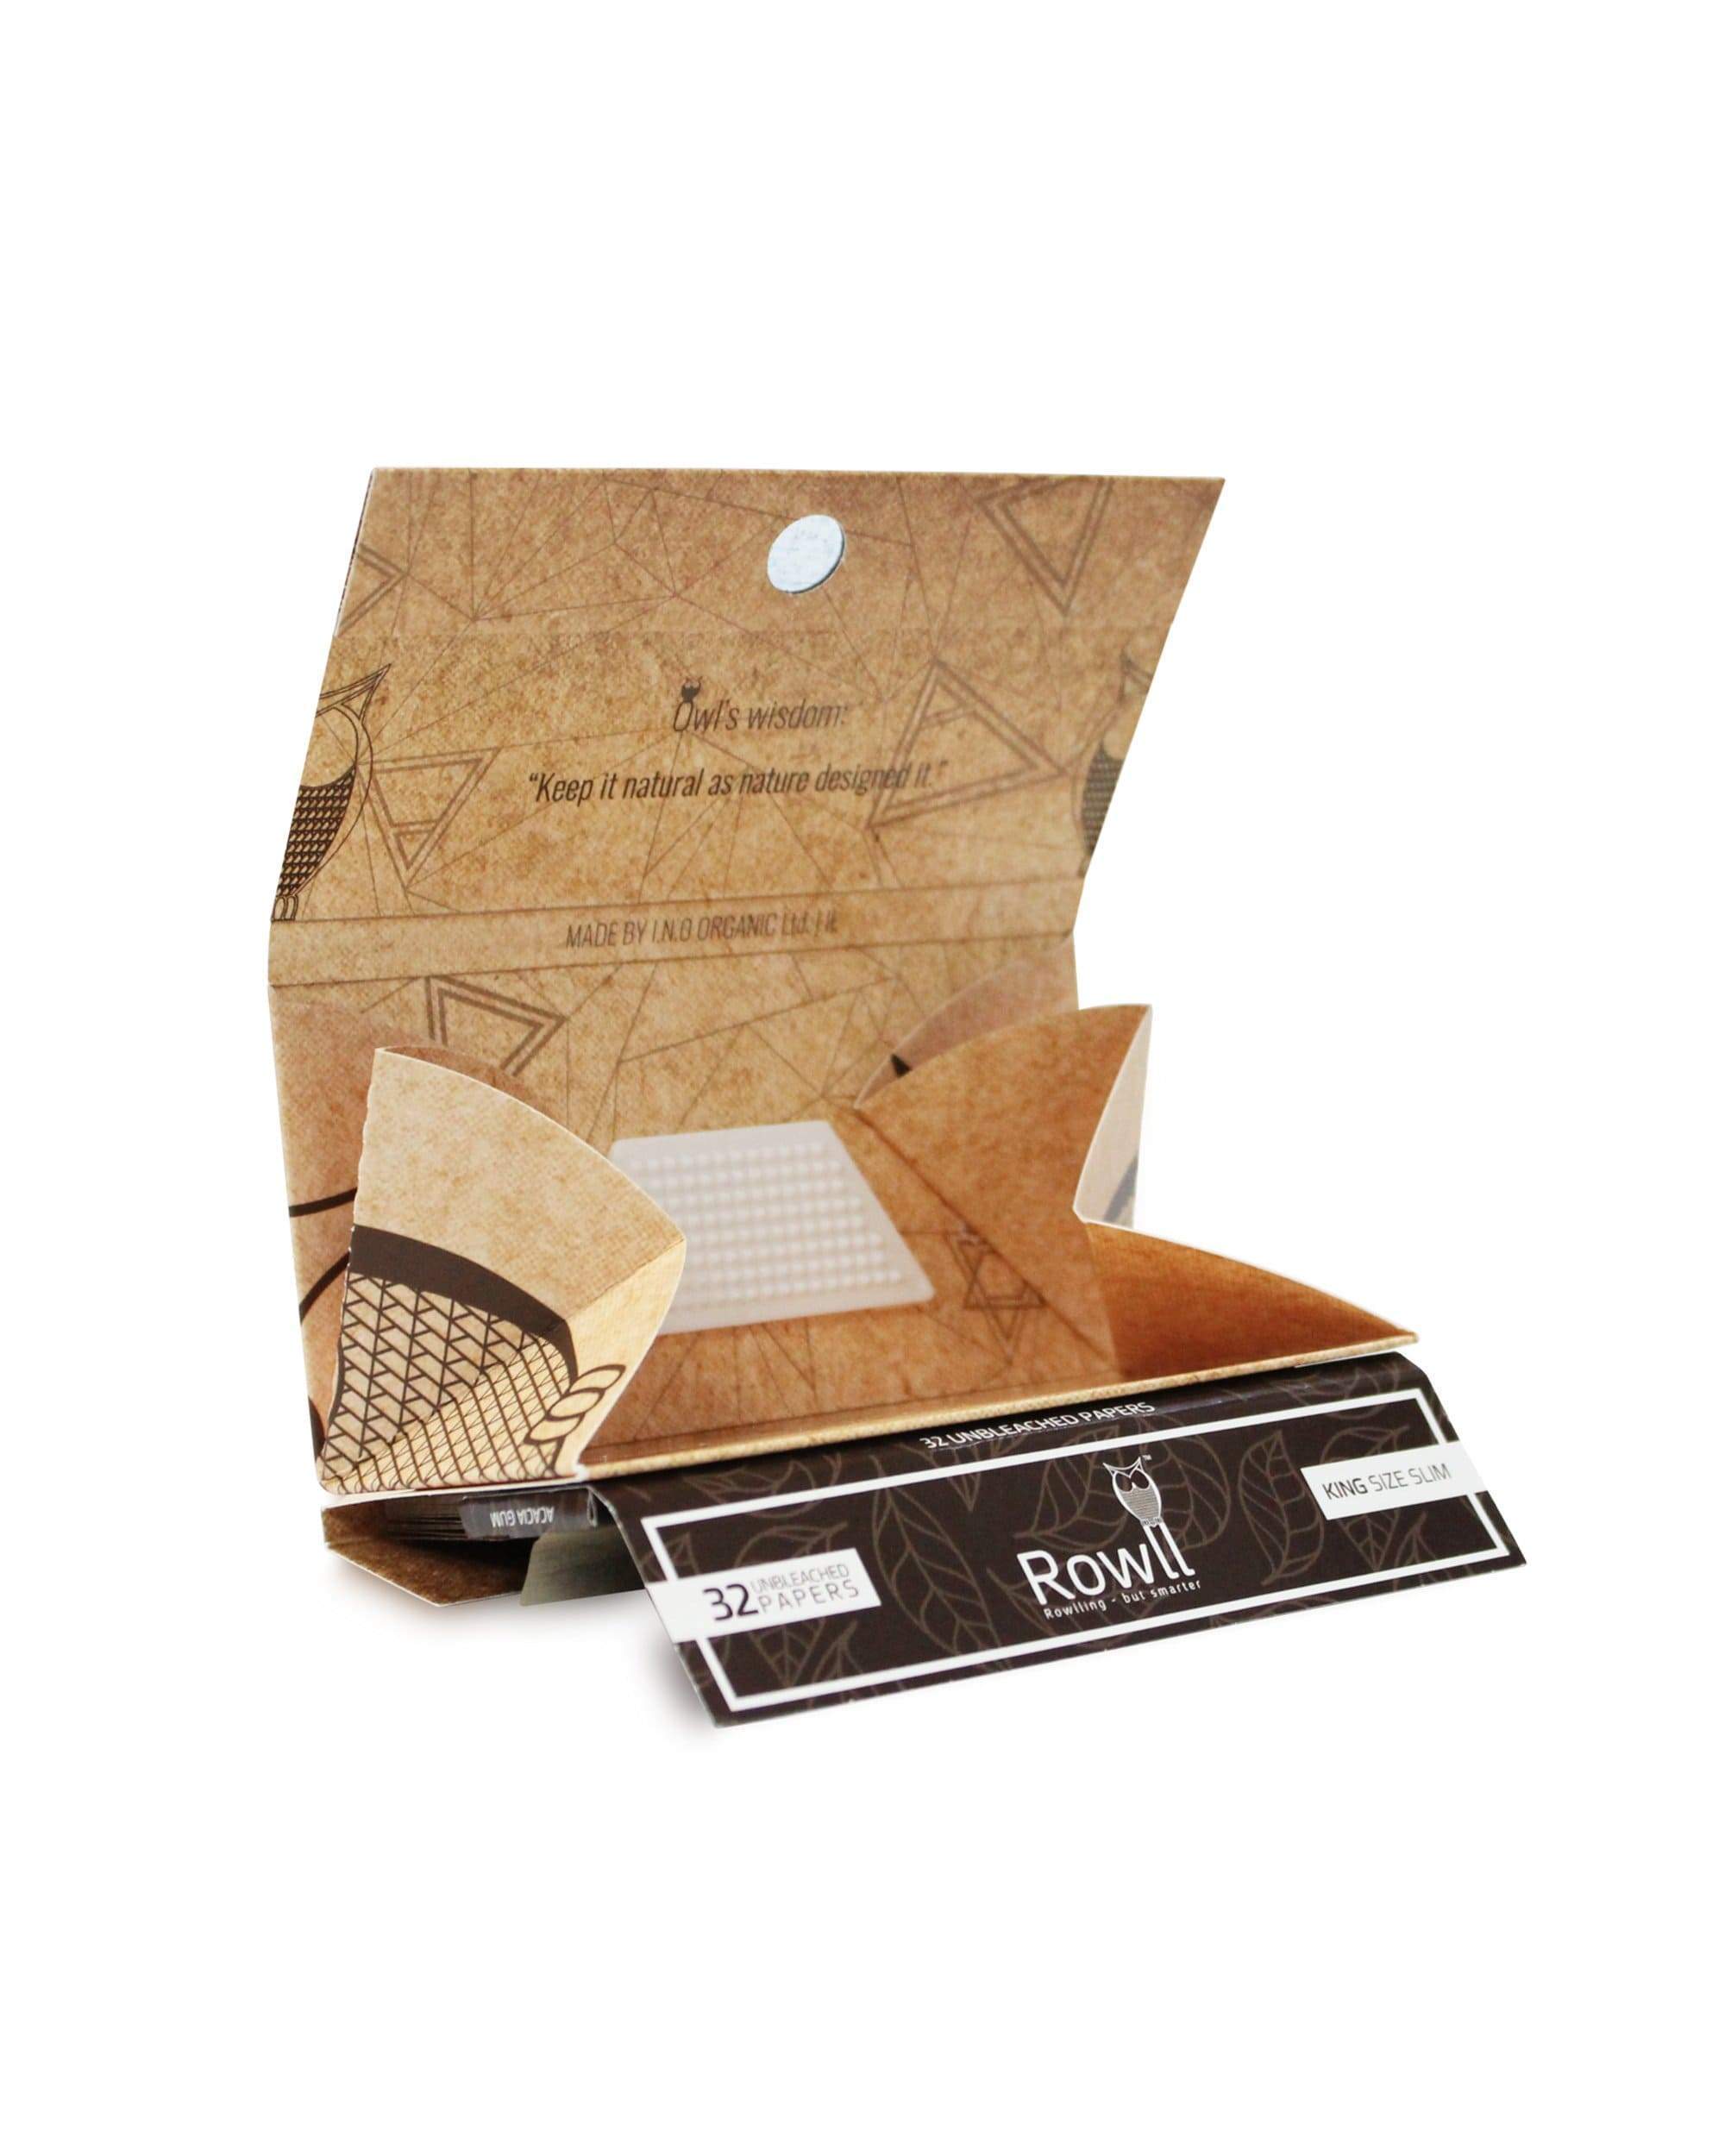 All in One Rolling Paper Kit w/ Grinder - Unbleached - Modern Day Hippie  Brand